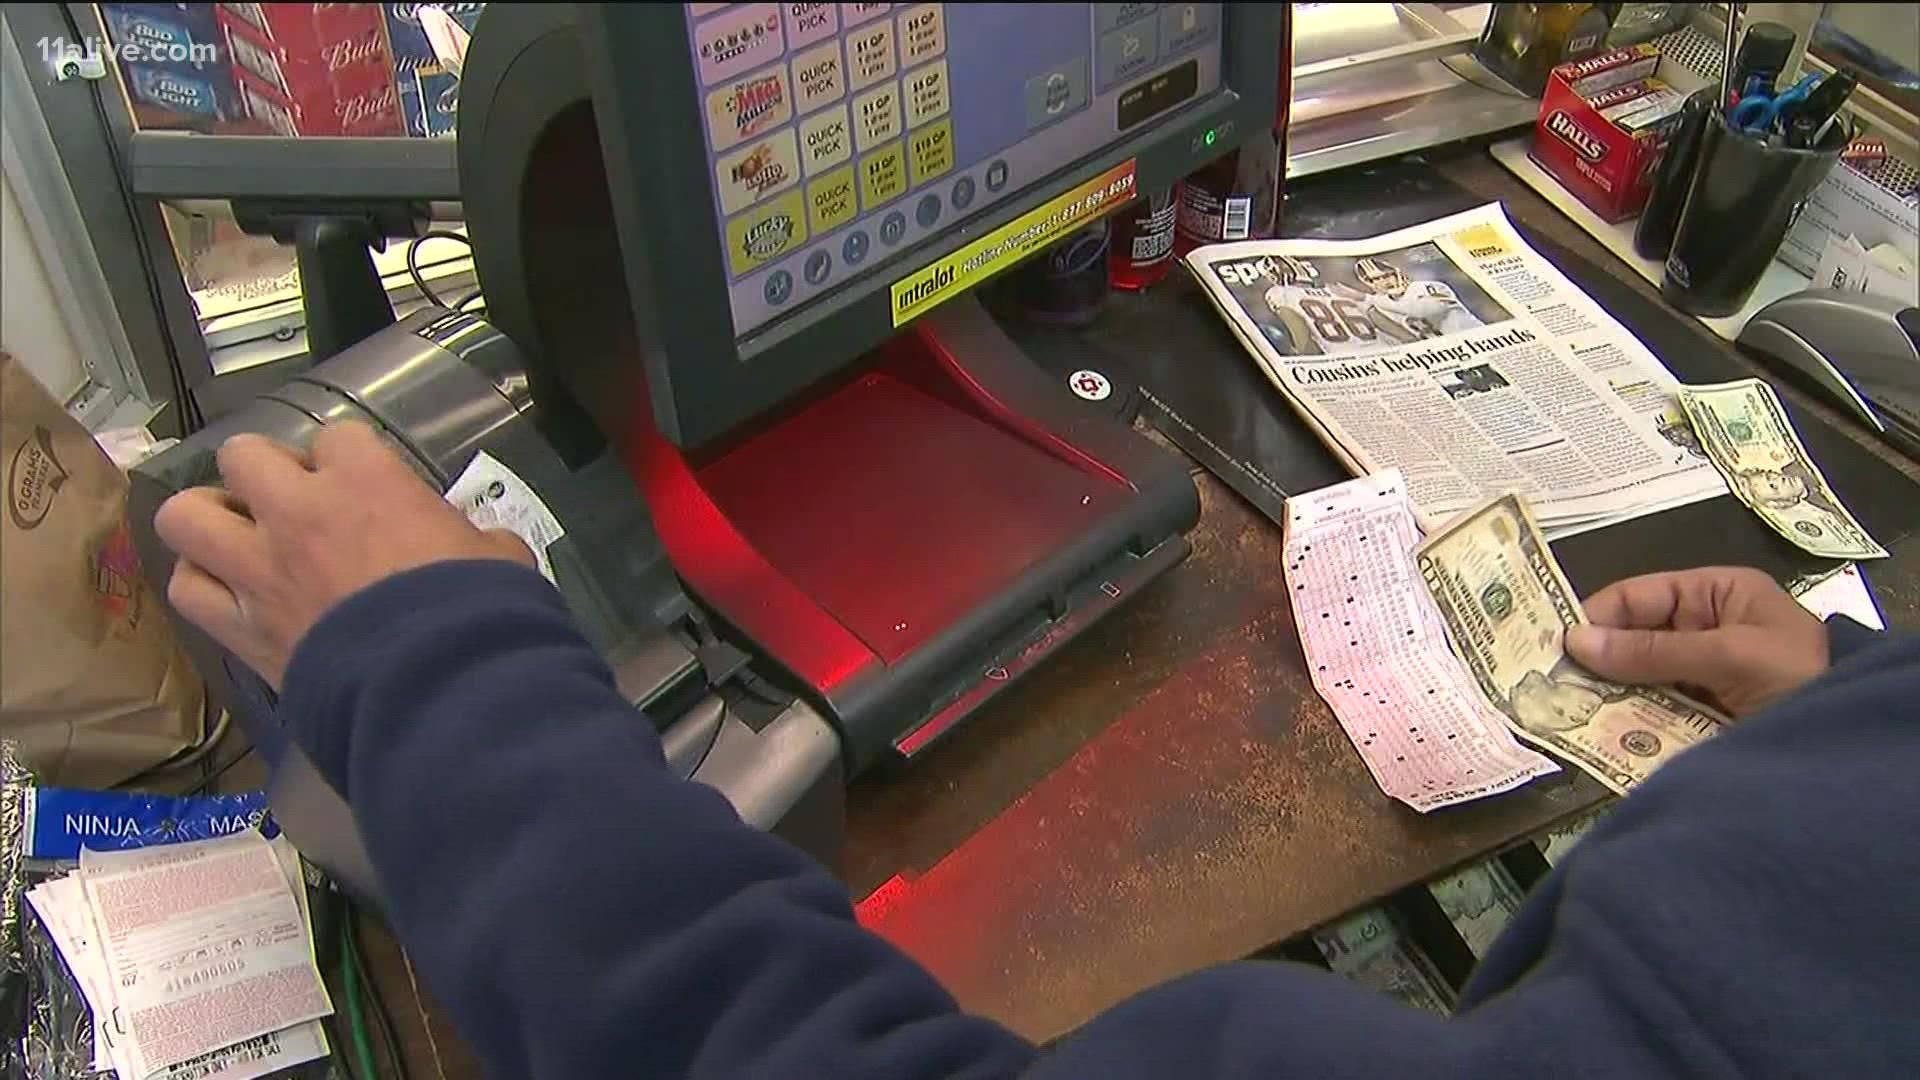 Starting Aug. 23, Powerball is adding a new drawing.